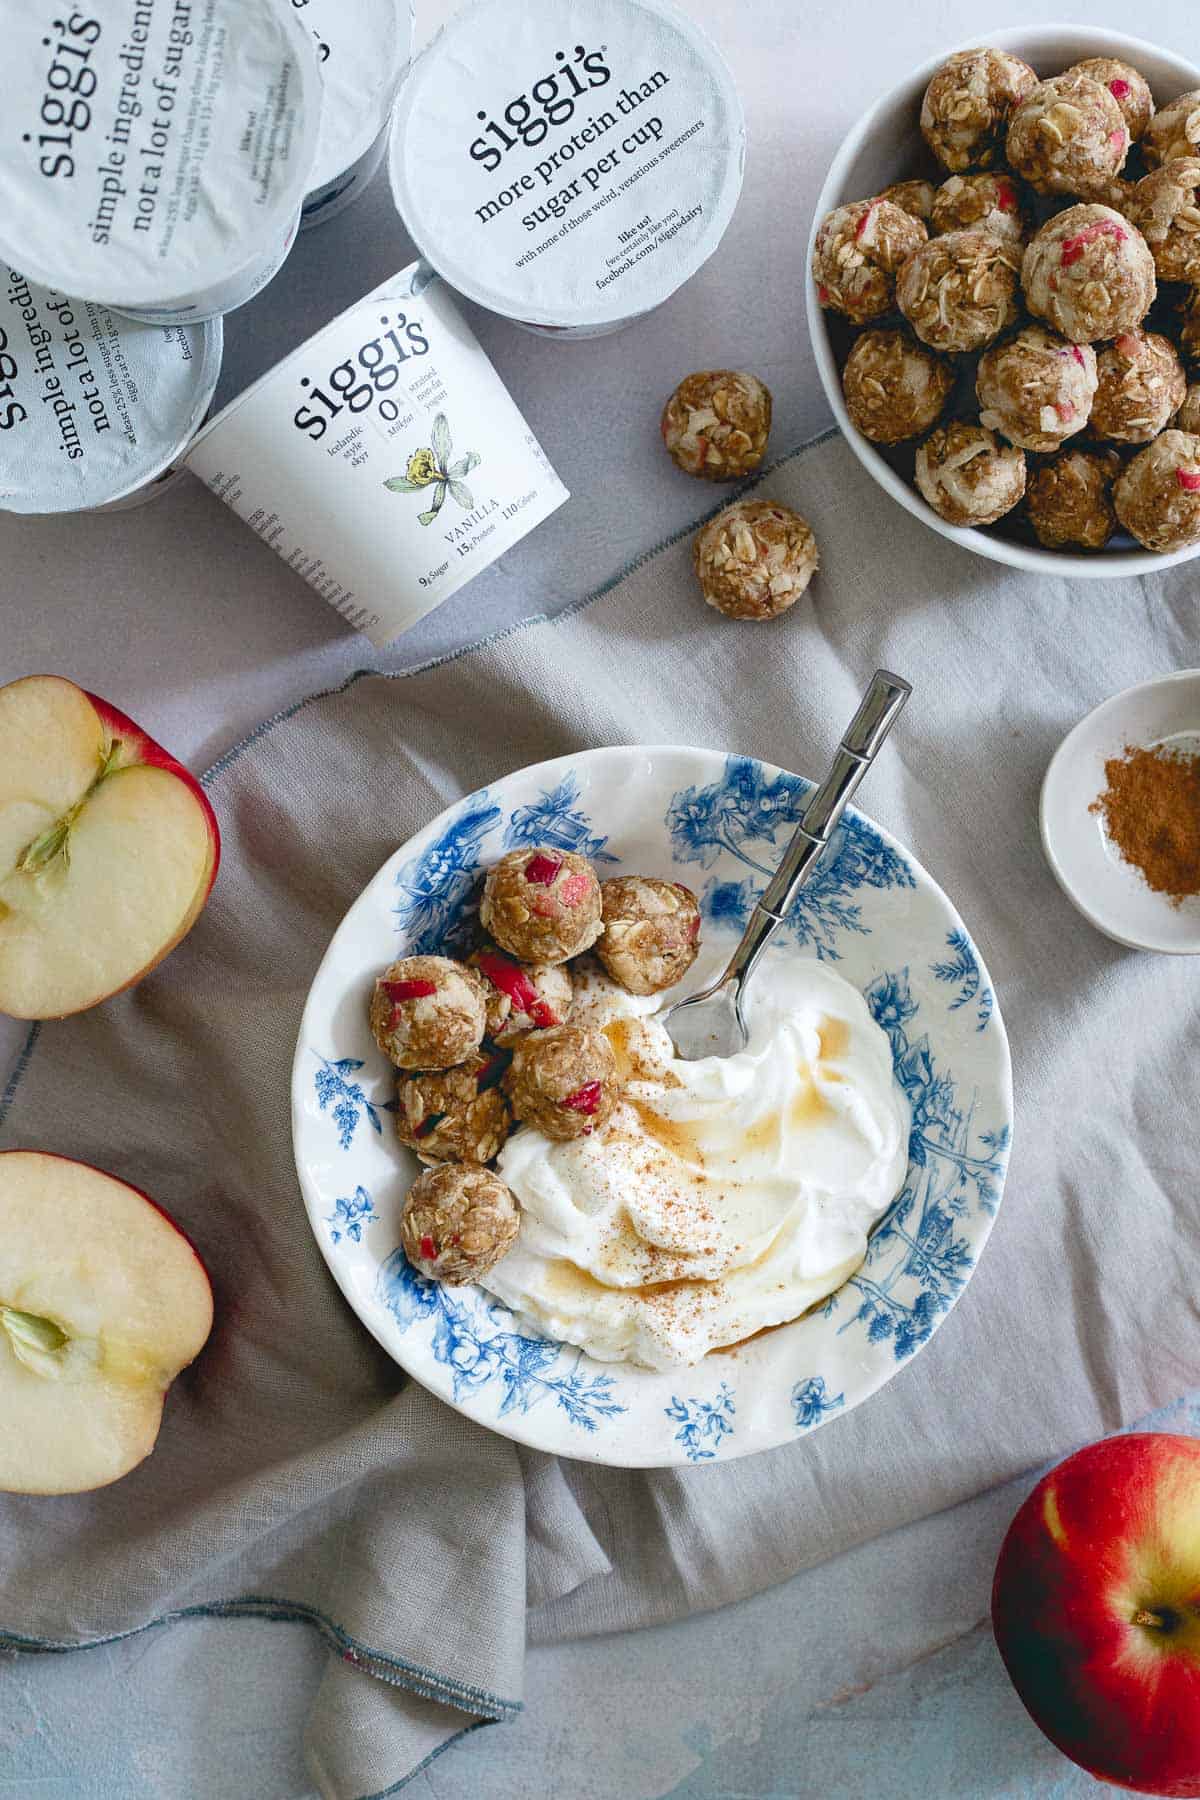 These apple cinnamon cookie bites are made with oats, cashew butter and real pieces of fresh apples. A great fall snack and delicious with a bowl of yogurt!